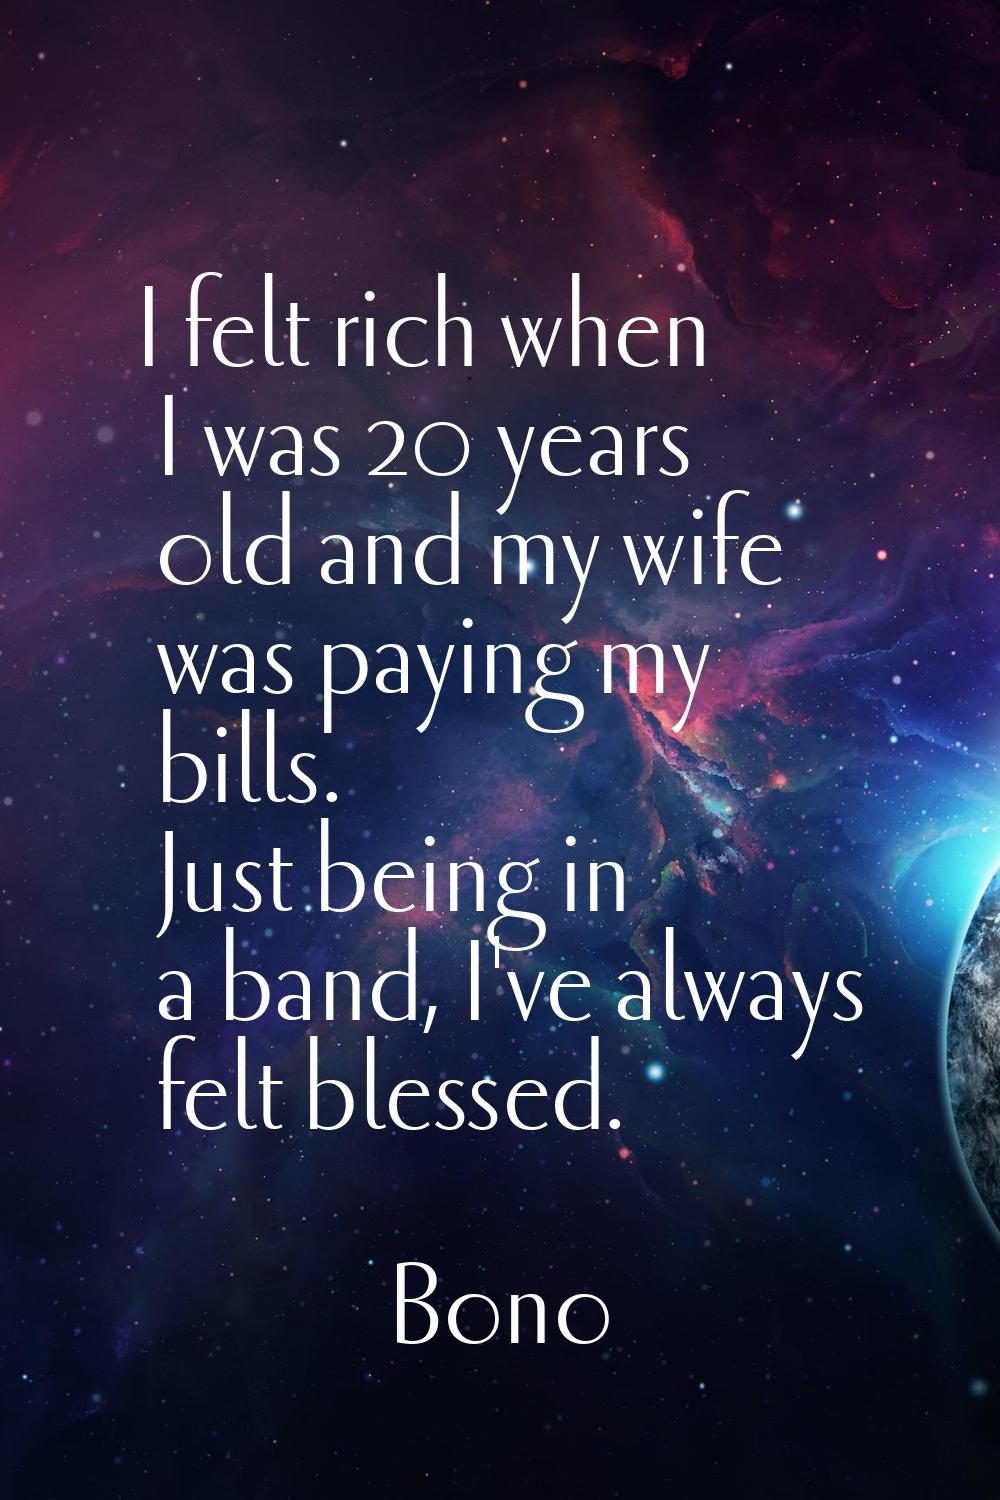 I felt rich when I was 20 years old and my wife was paying my bills. Just being in a band, I've alw